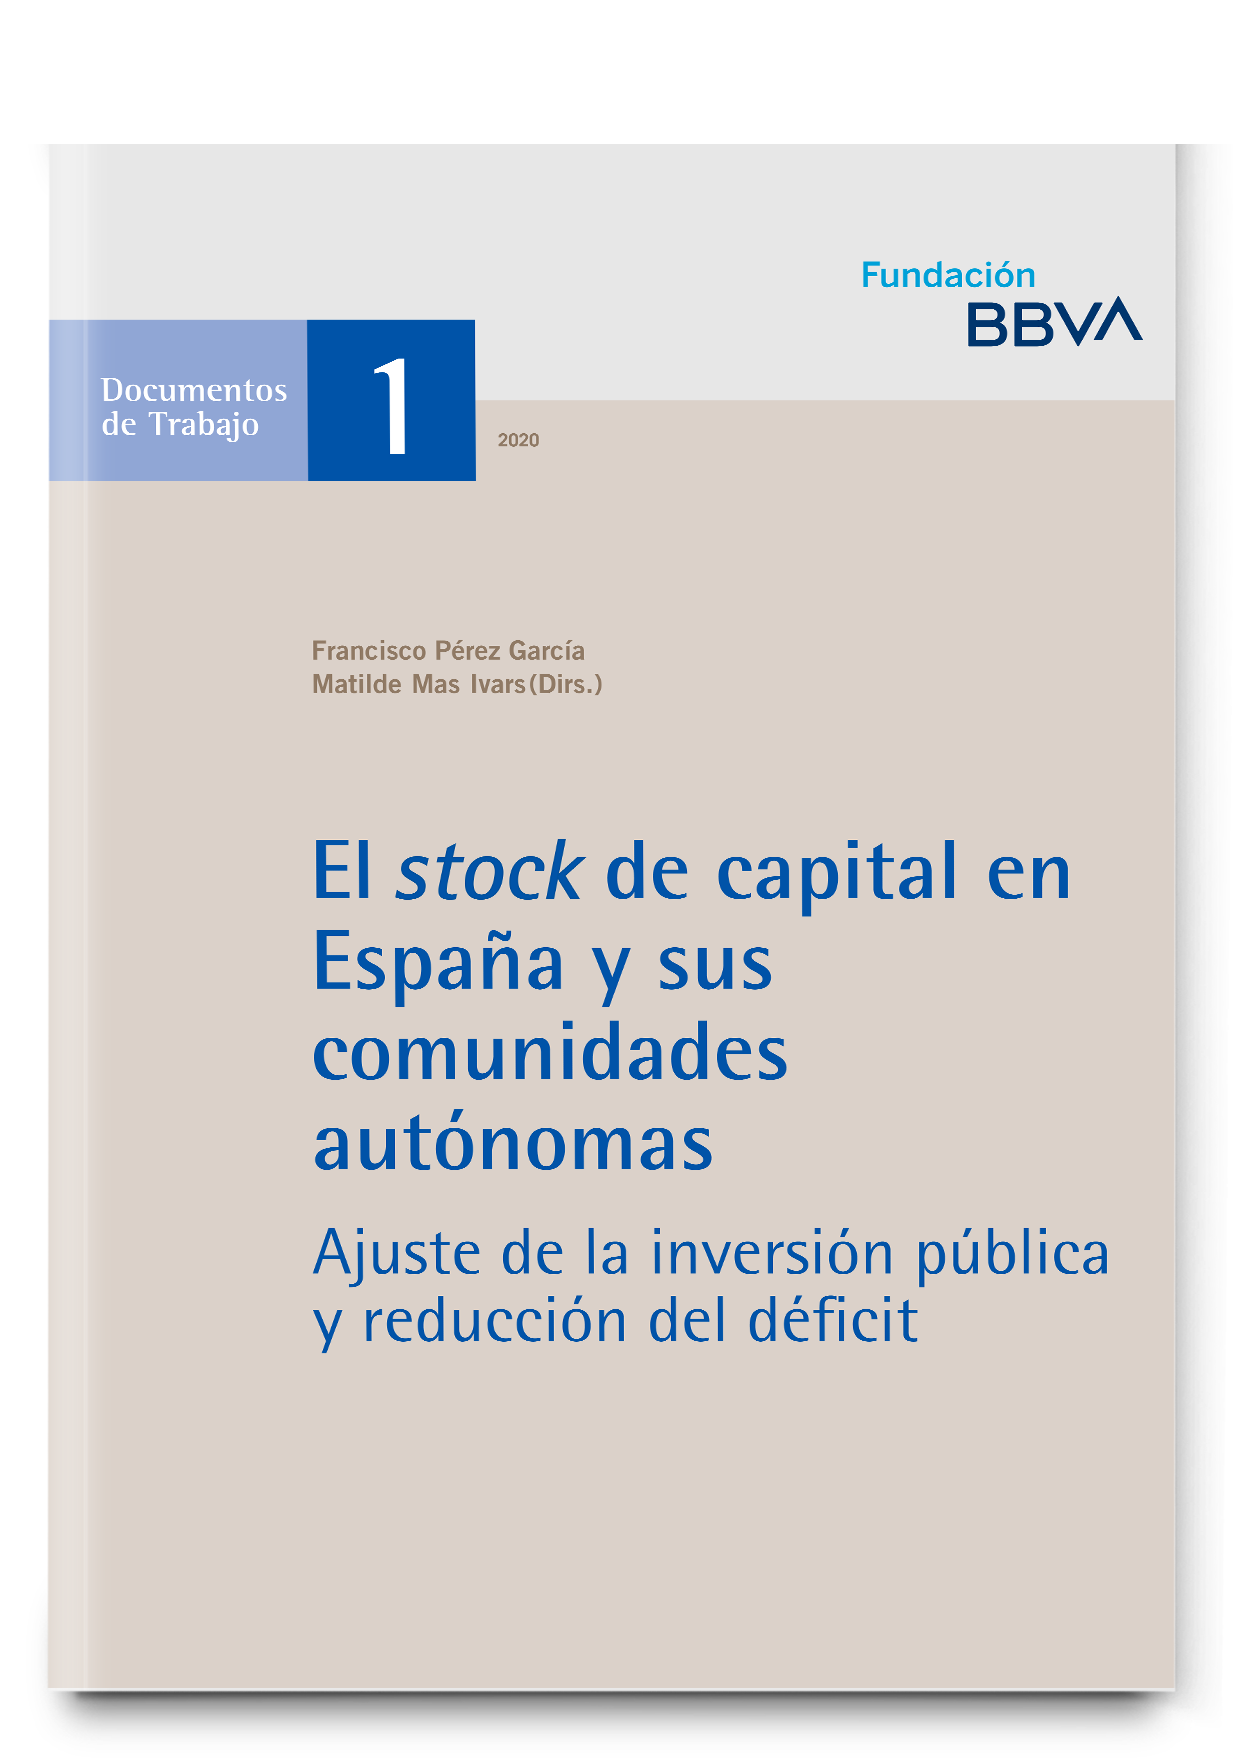 Capital stock in Spain and its autonomous communities. Adjustments in public investment and deficit reduction (1964-2017)